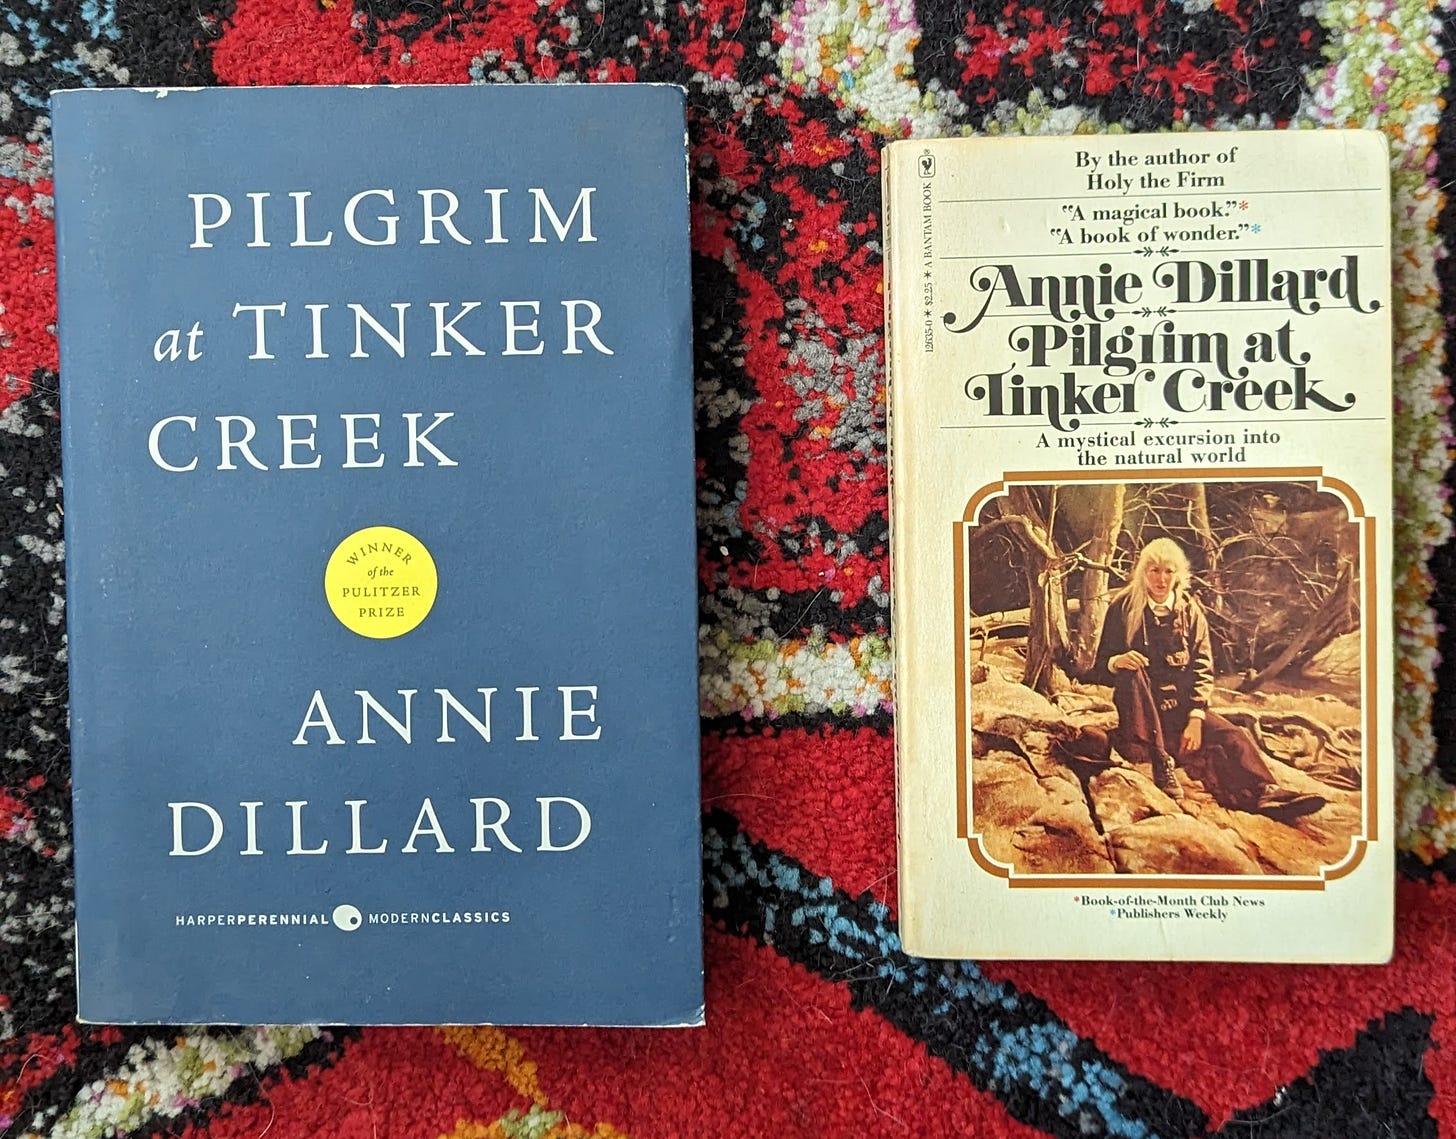 Picture of two editions of Pilgrim at Tinker Crink